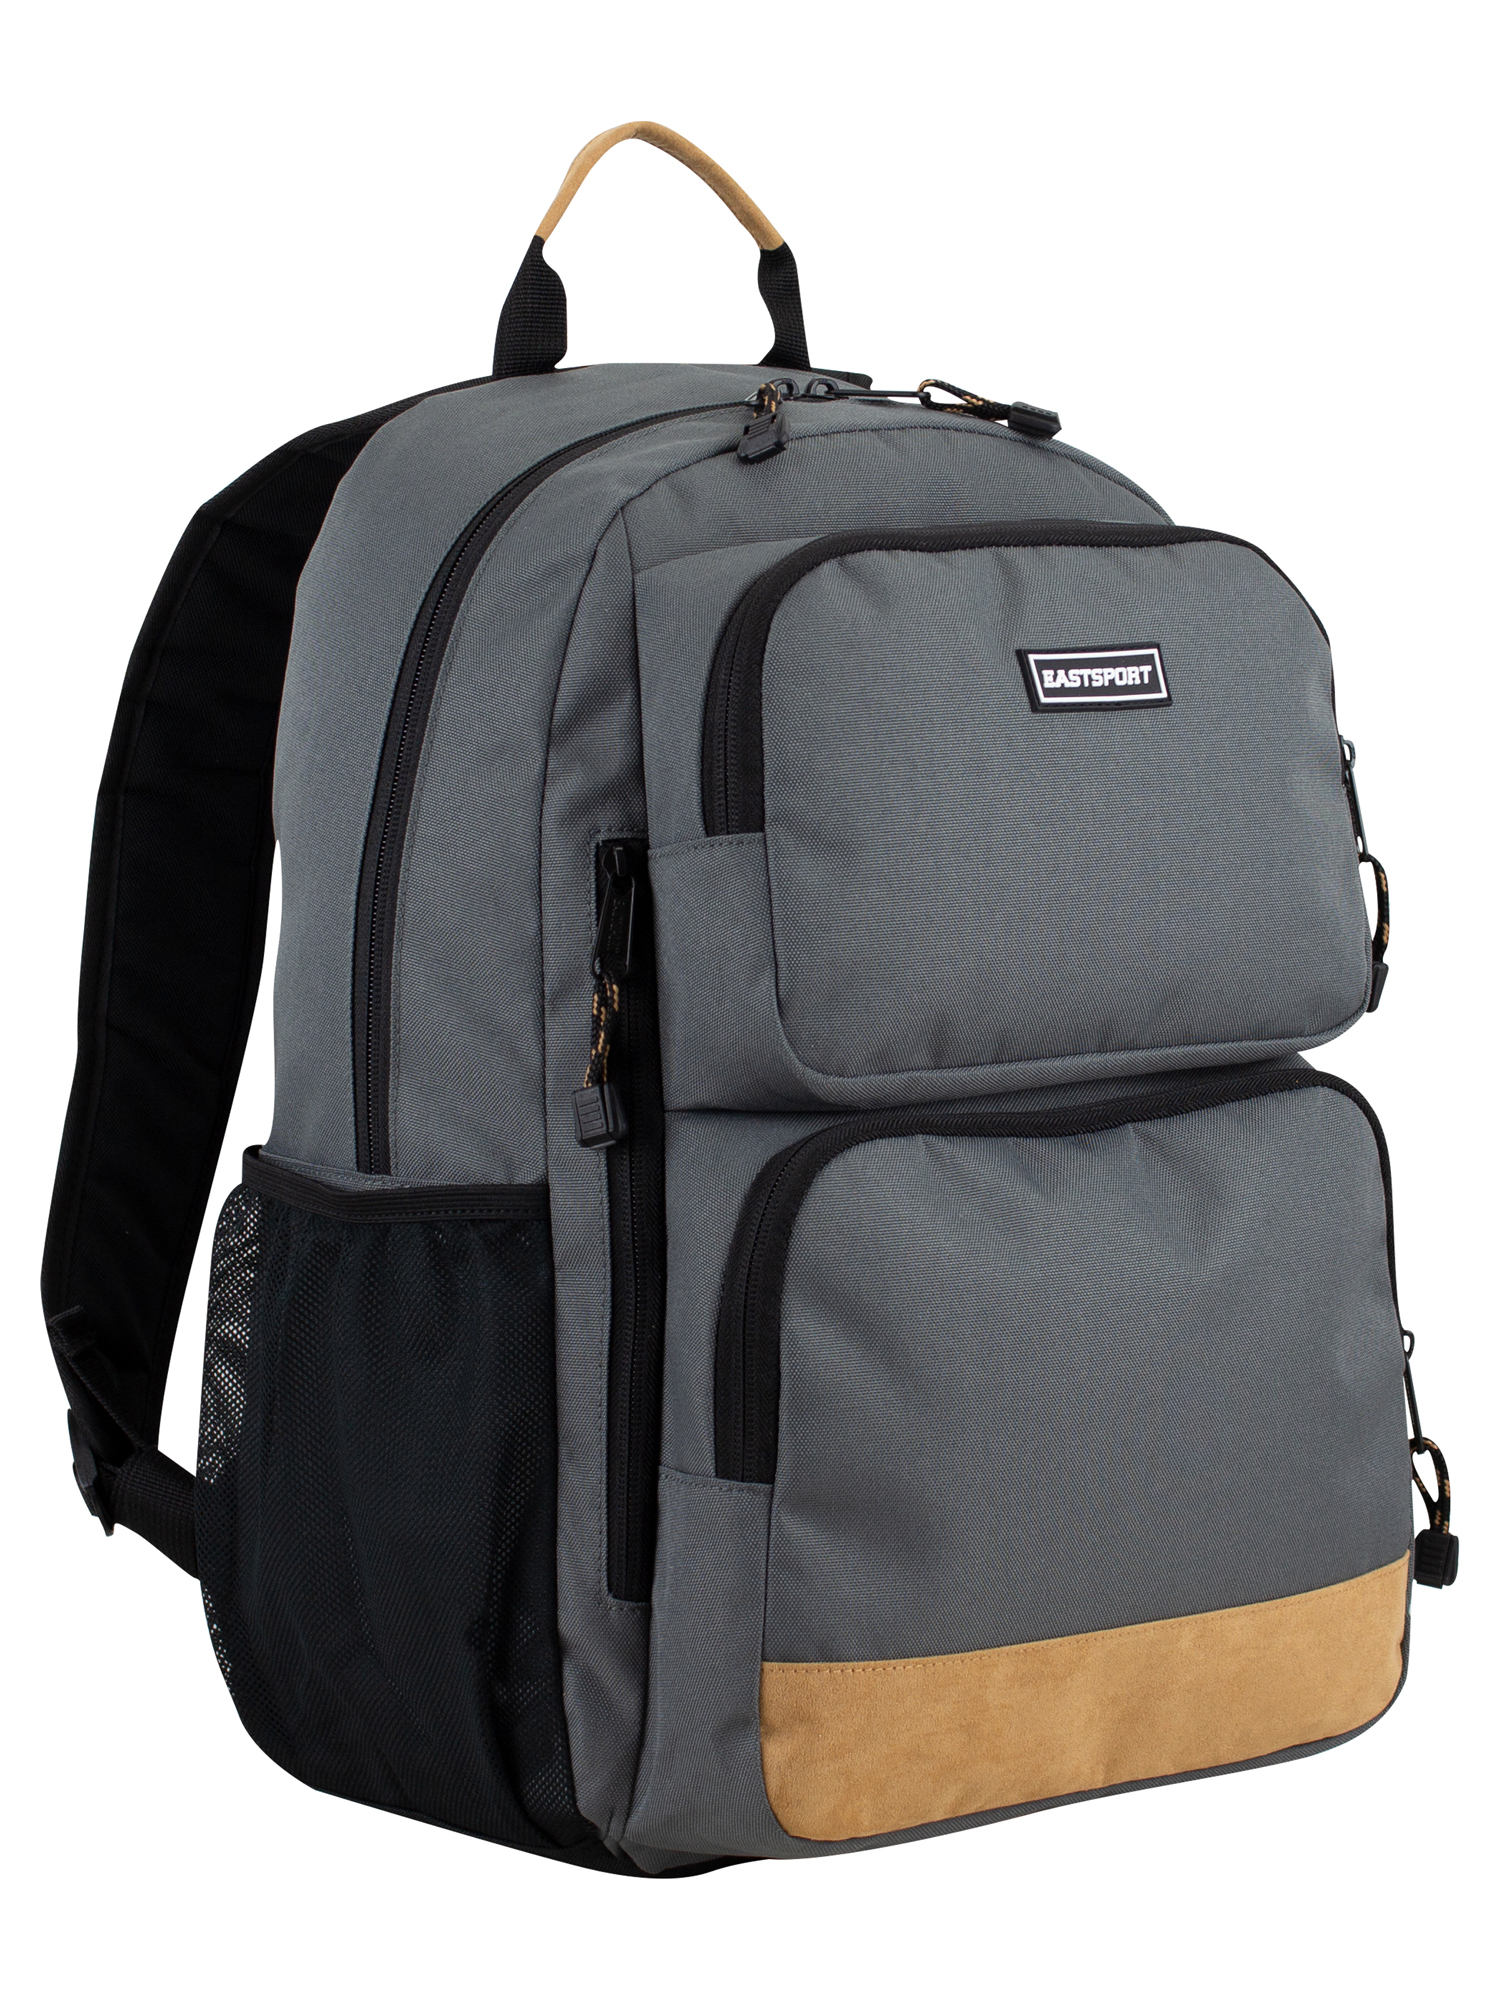 Eastsport Unisex Core Excel Backpack, Charcoal - image 1 of 7